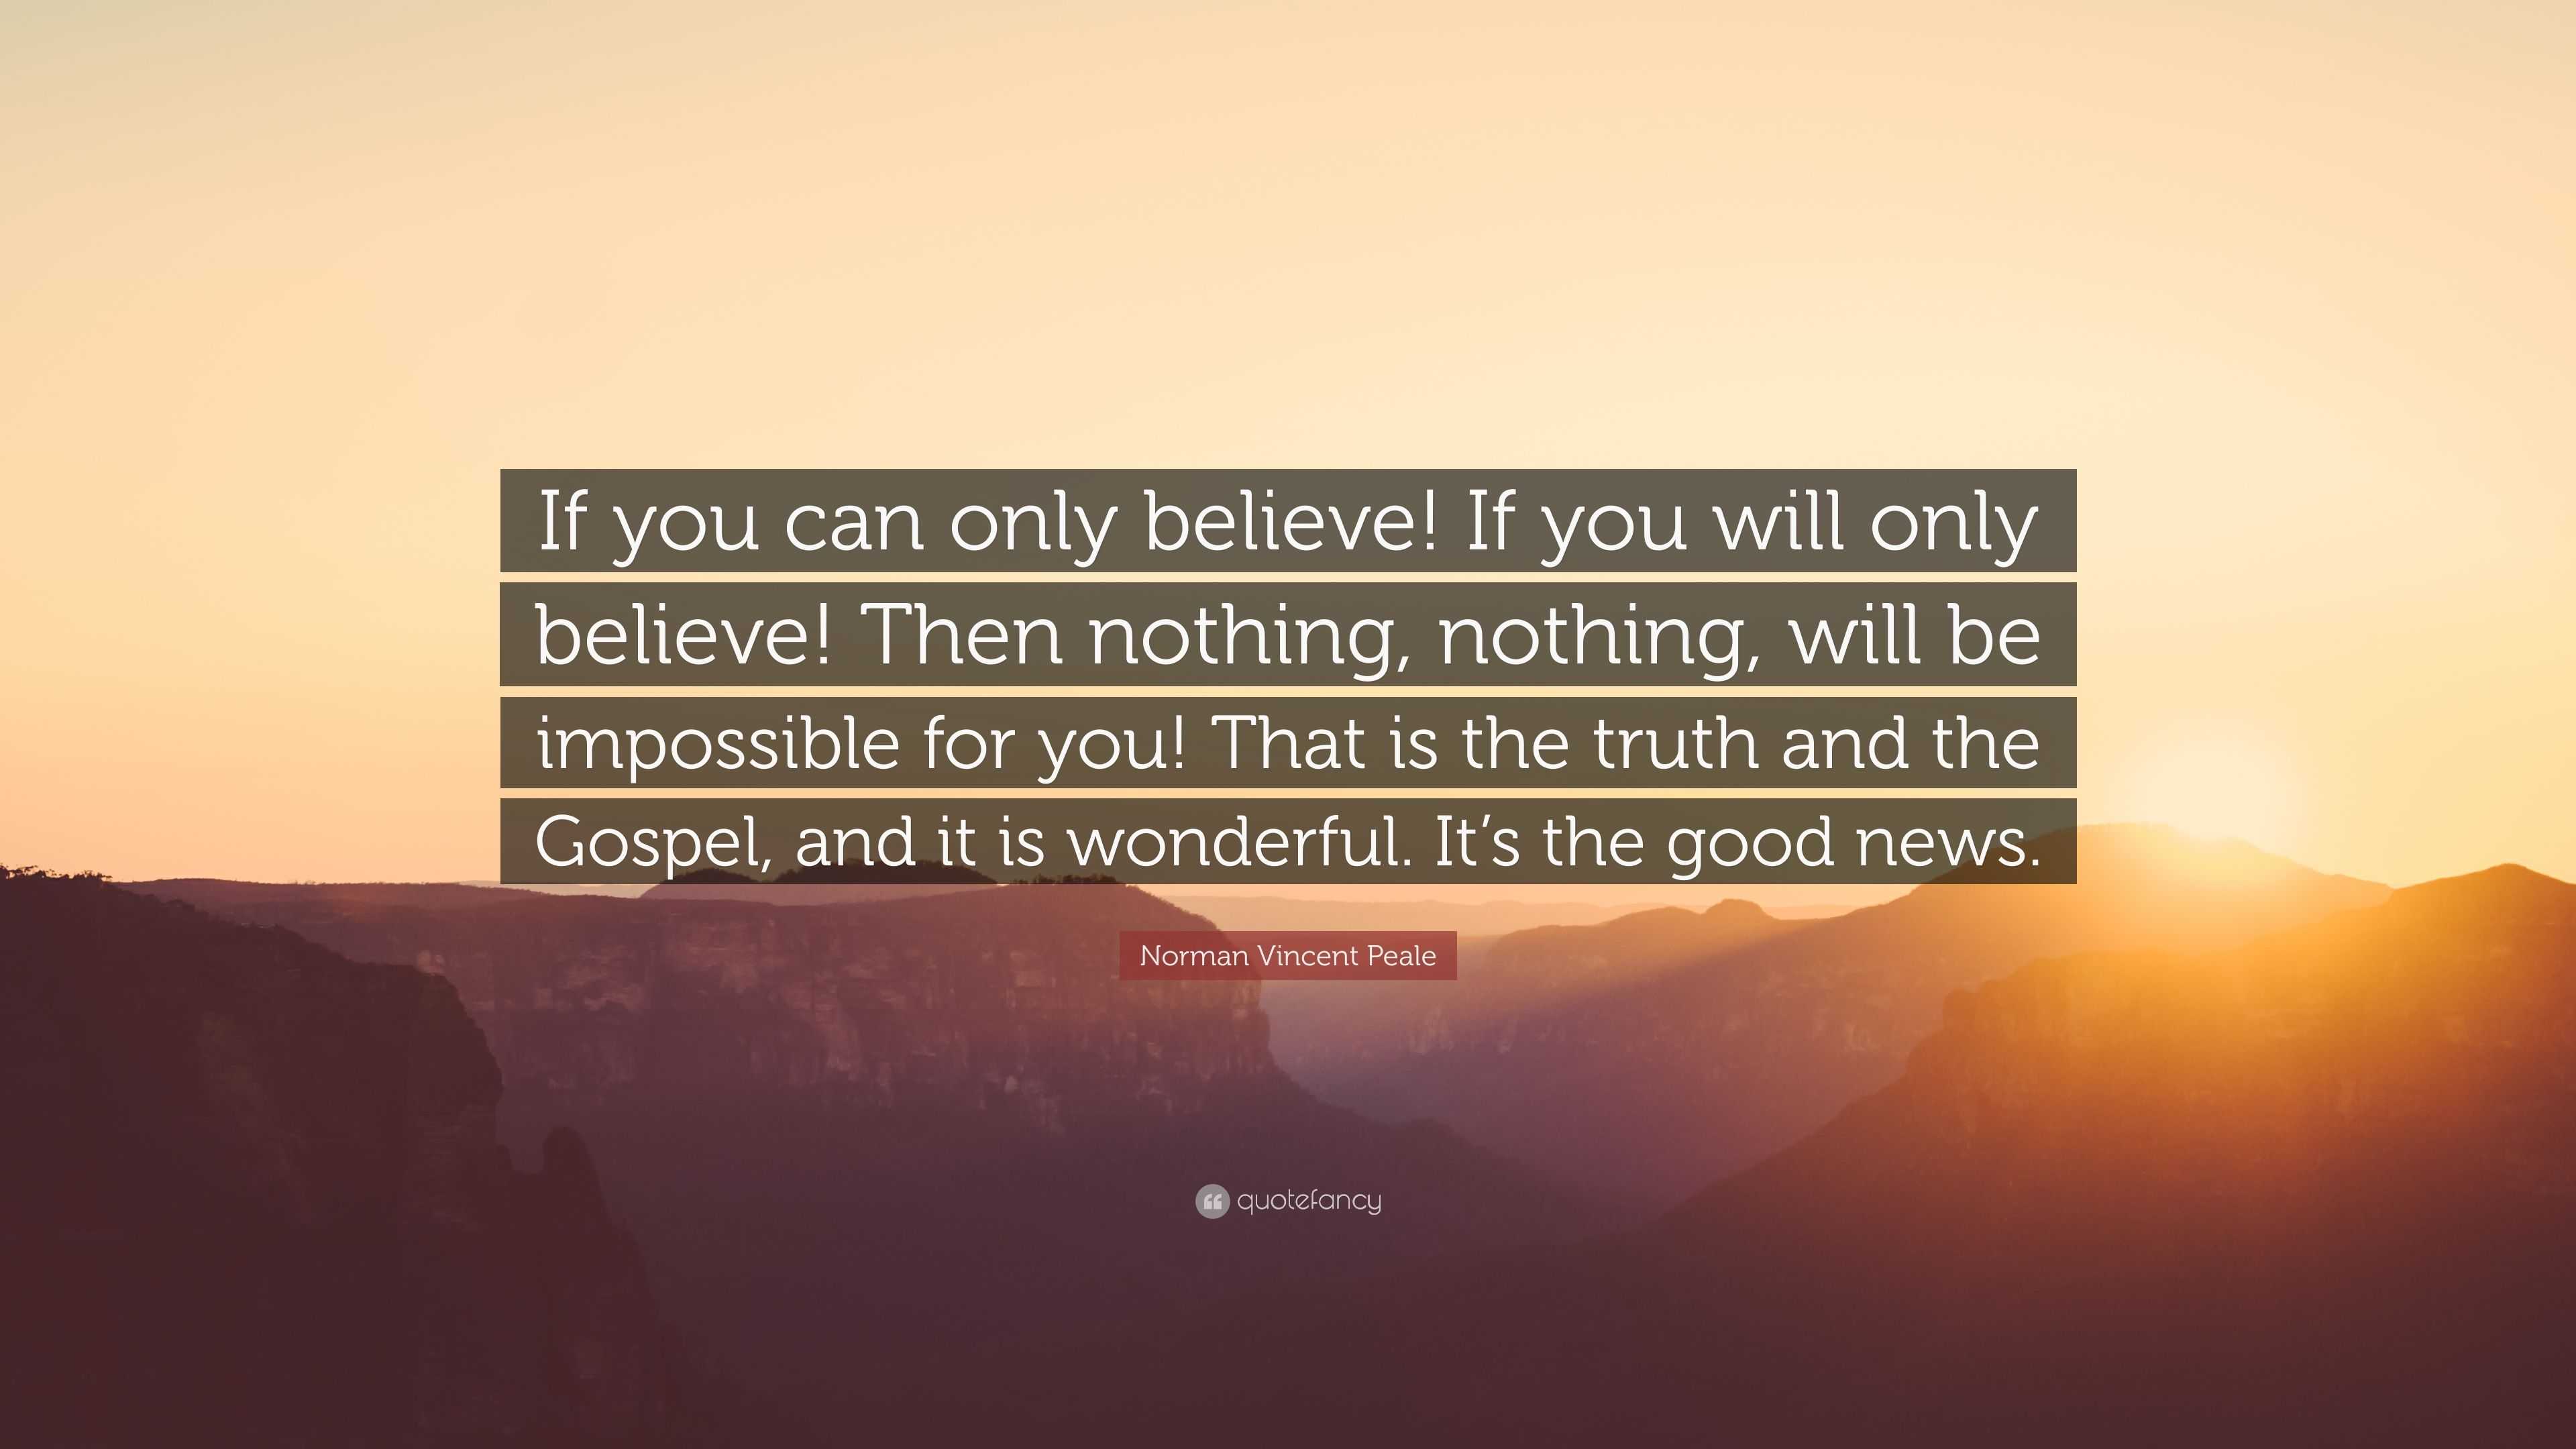 It's impossible to believe the entire gospel